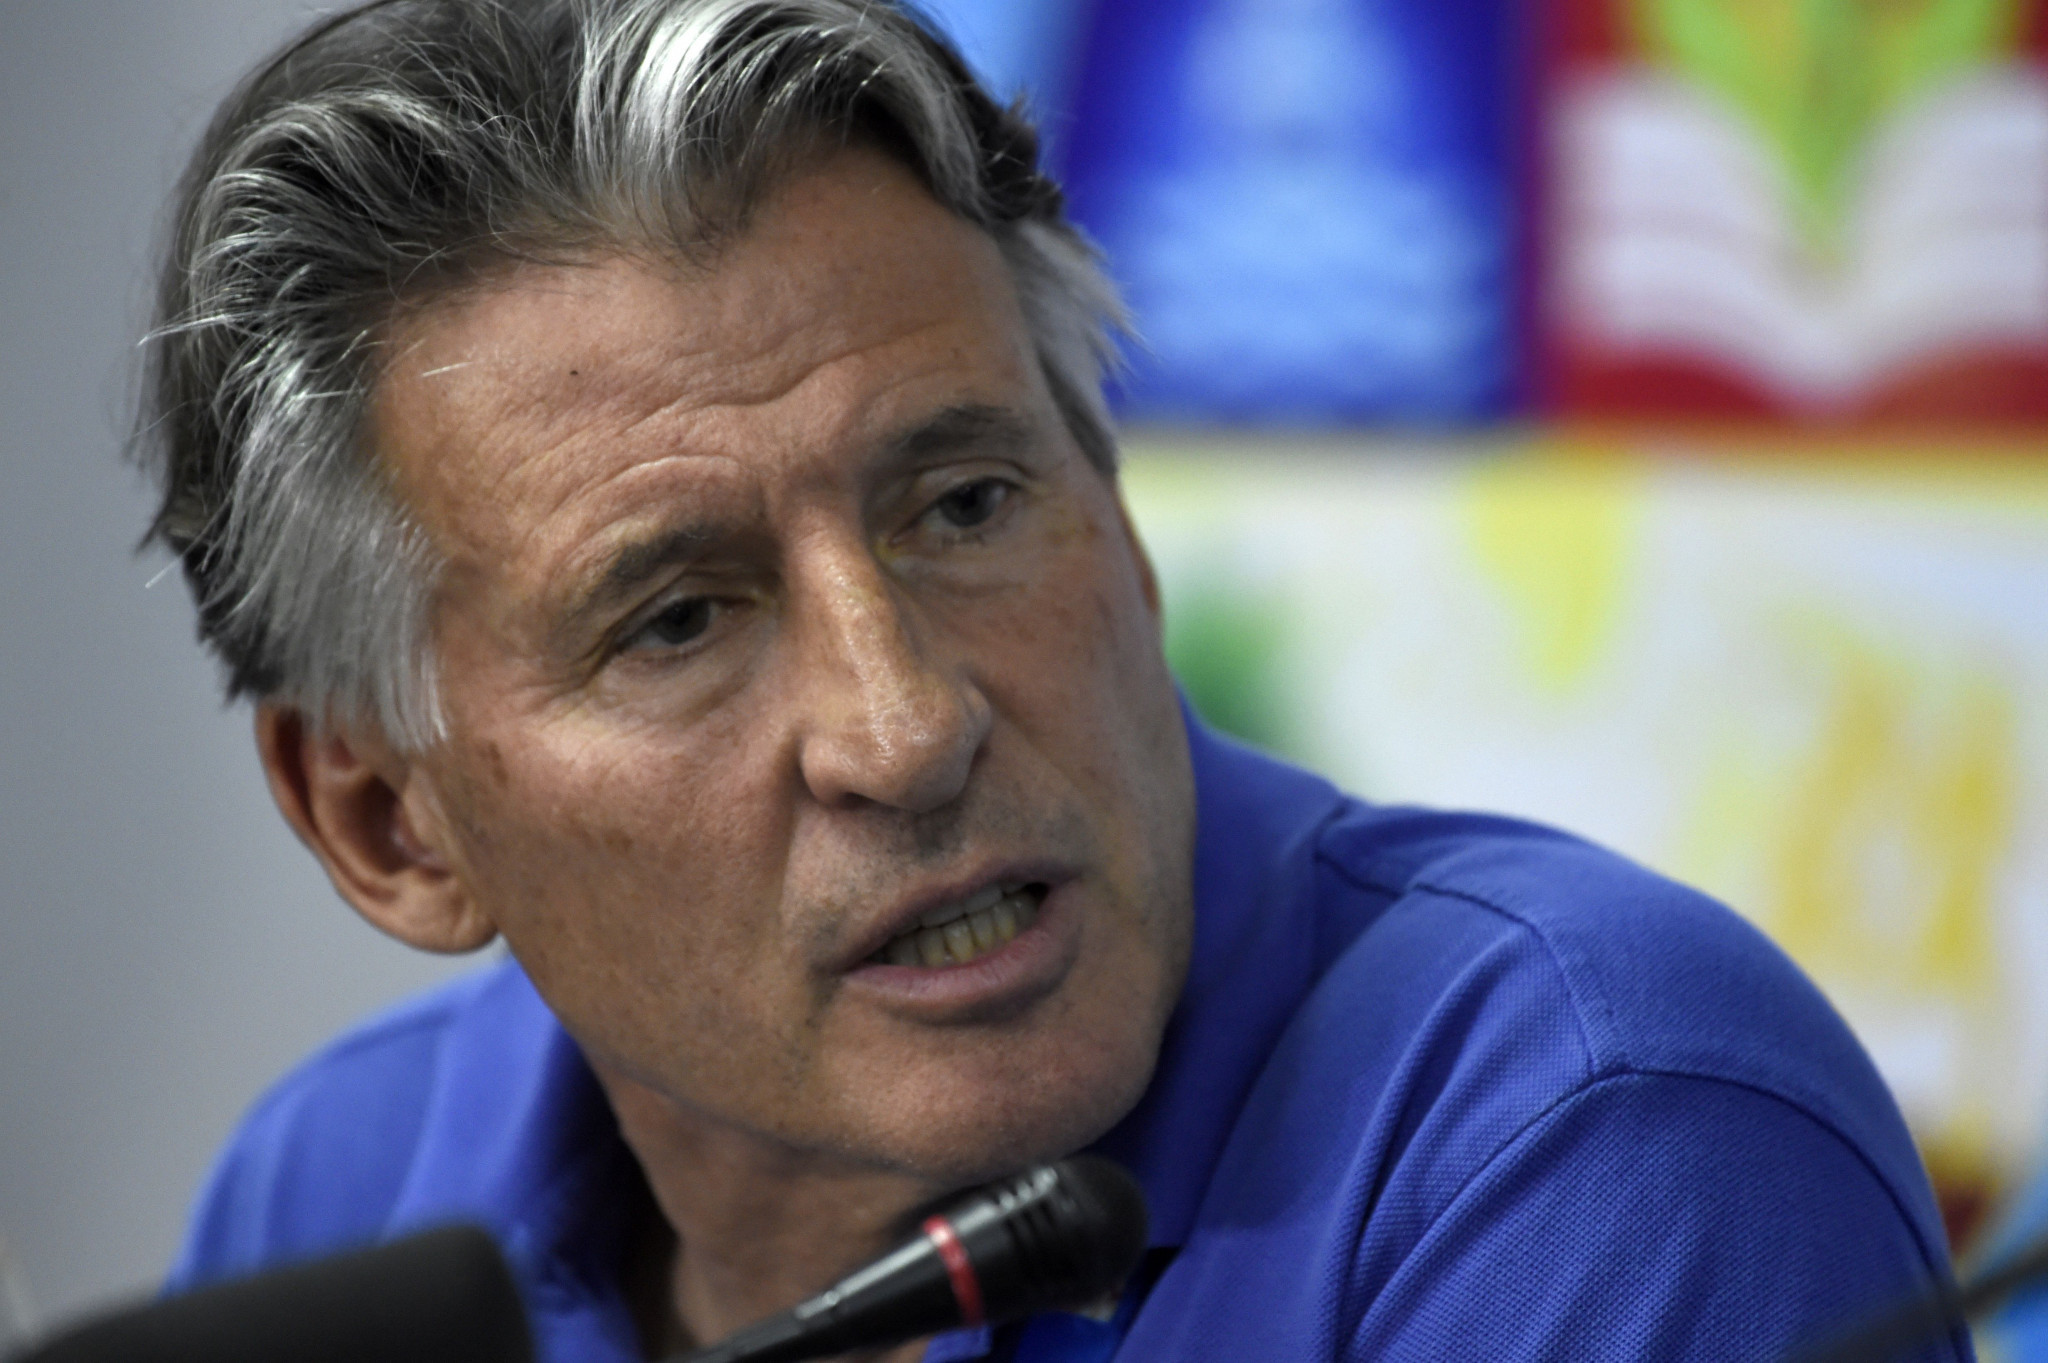 IAAF President Sebastian Coe stated he is hopeful all countries will attend next year's World Athletics Championships ©Getty Images